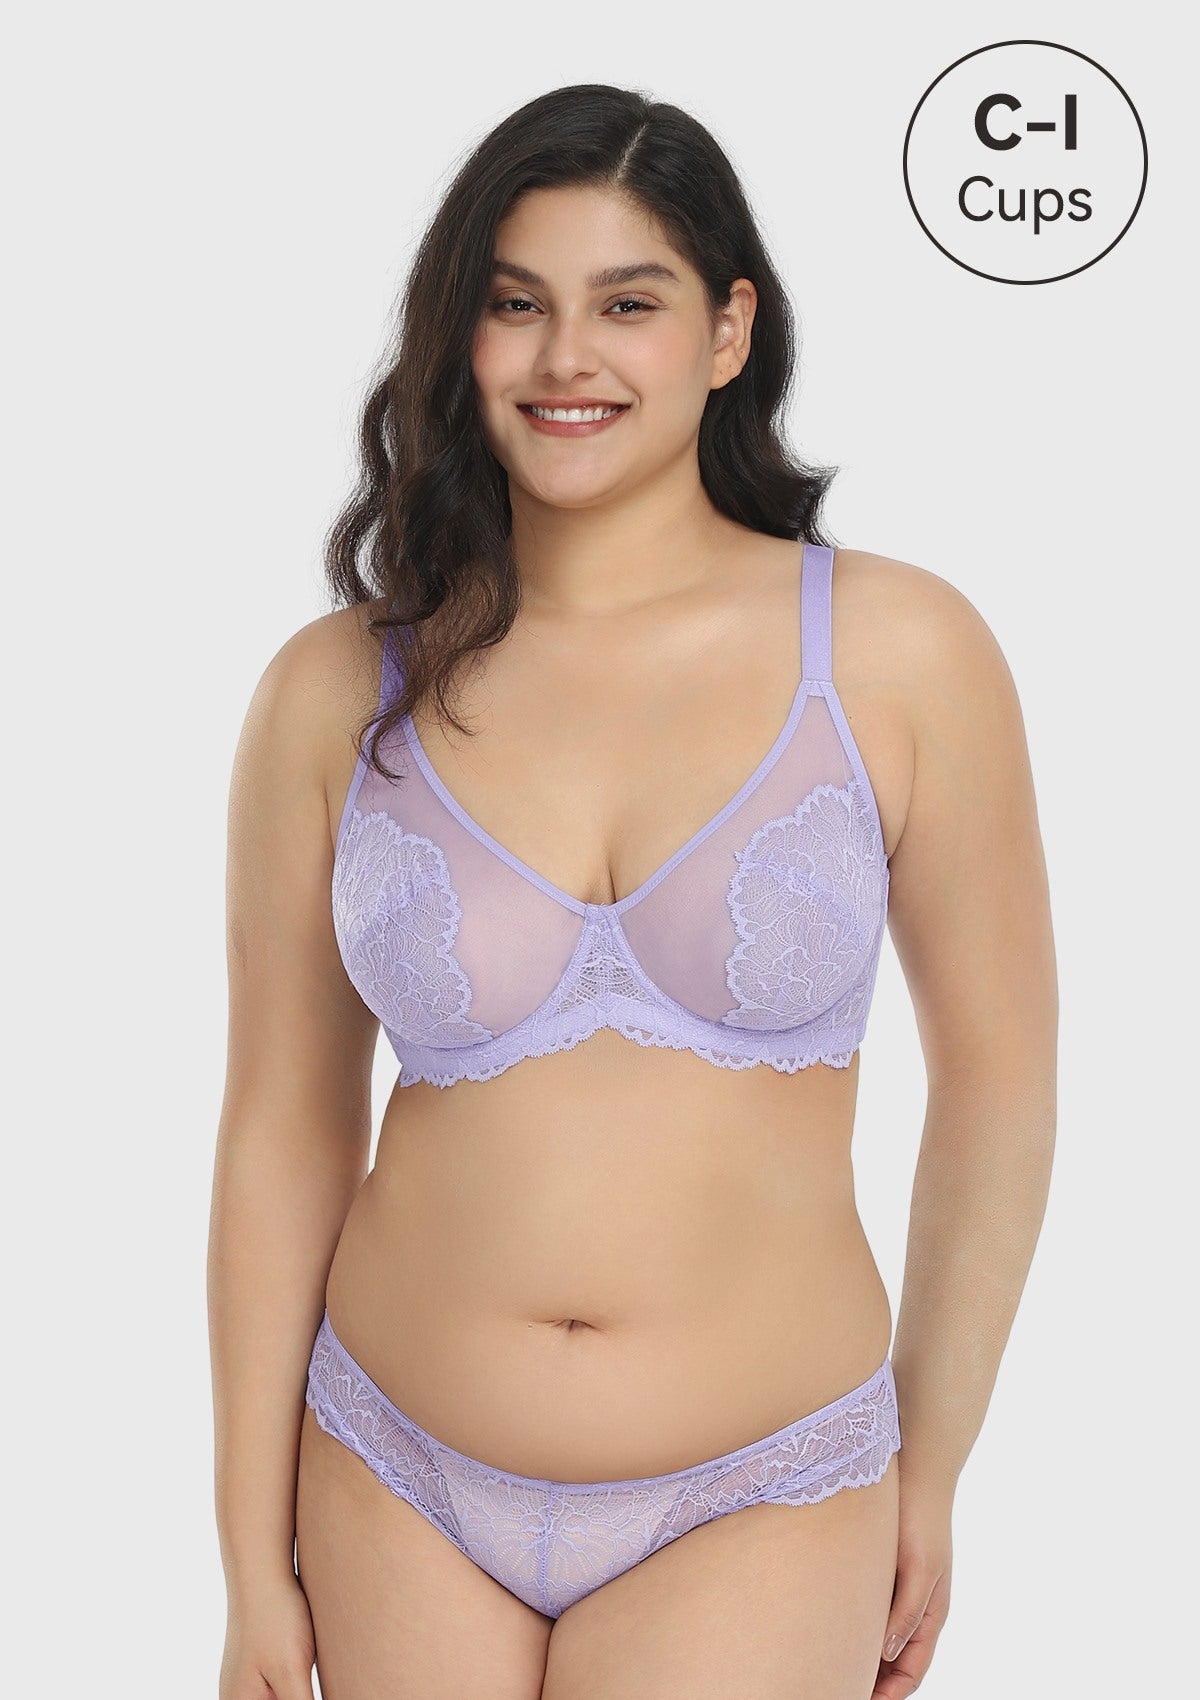 HSIA Blossom Transparent Lace Bra: Plus Size Wired Back Smoothing Bra - Light Purple / 38 / D